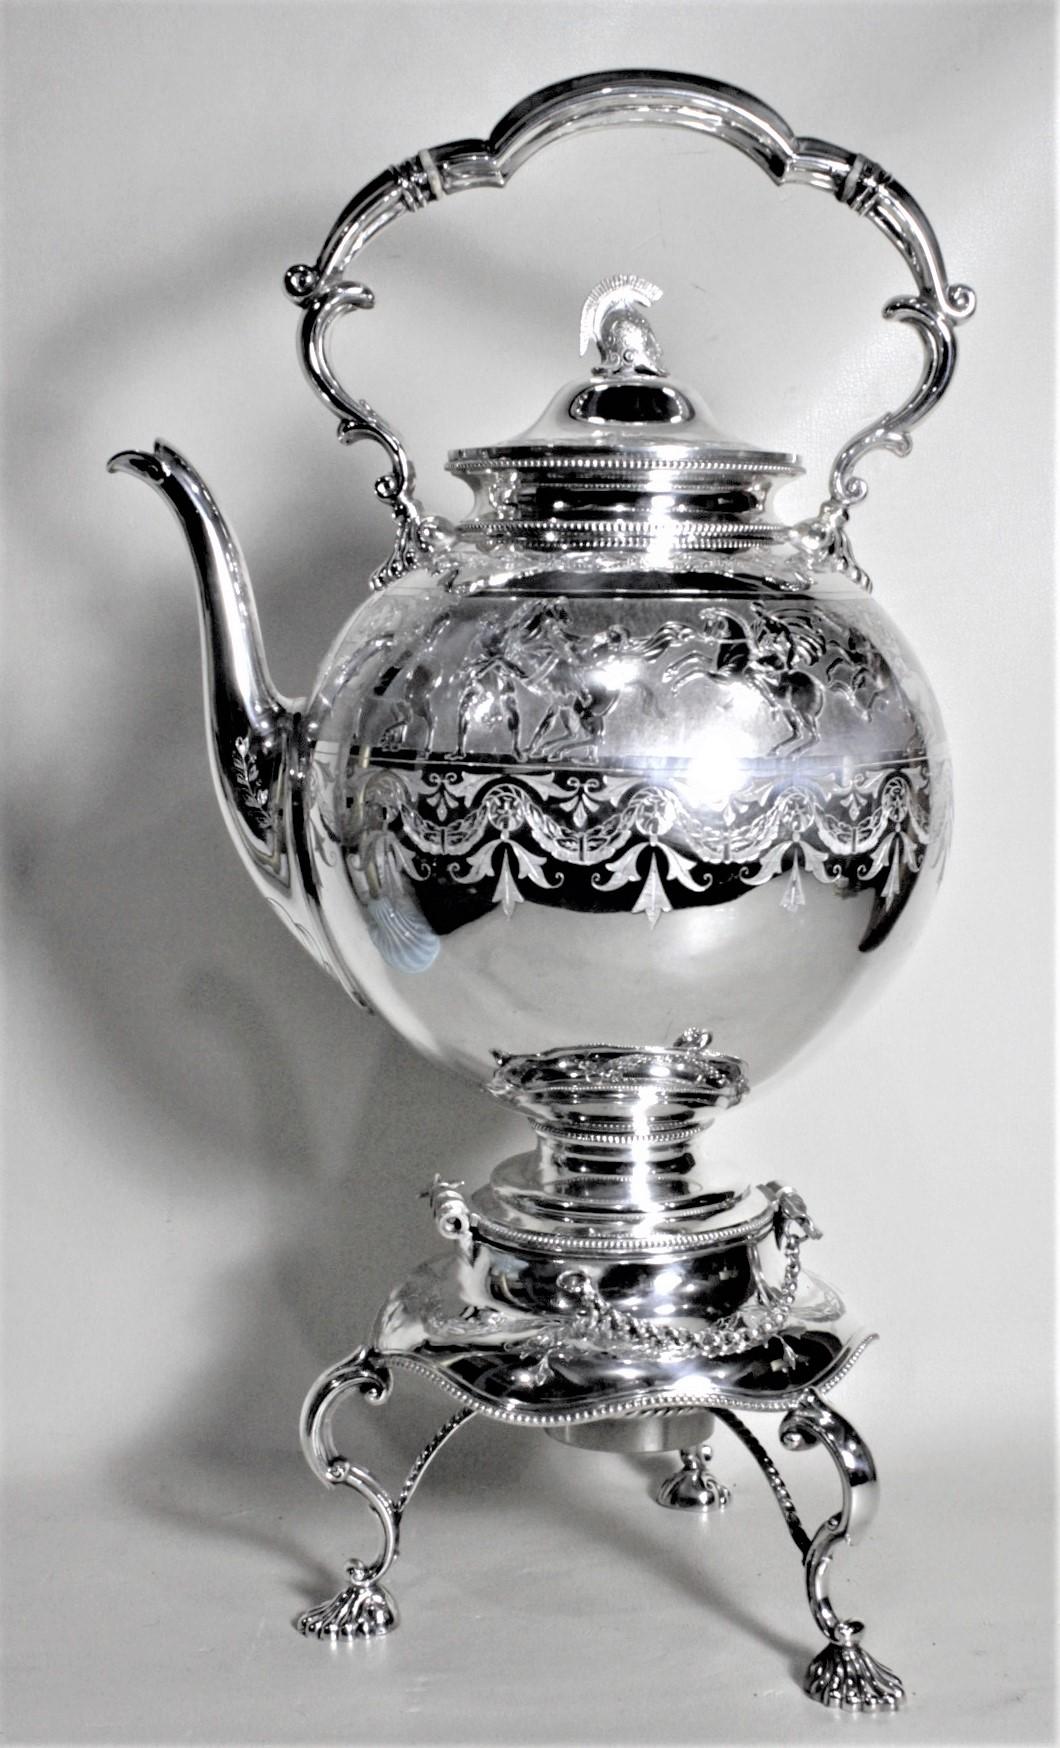 This antique silver plated tipping kettle or teapot originates from England and dating from circa 1900 and done in the period Edwardian style. The teapot or kettle has an interesting figural helmet finial on the top and heavily engraved sides done